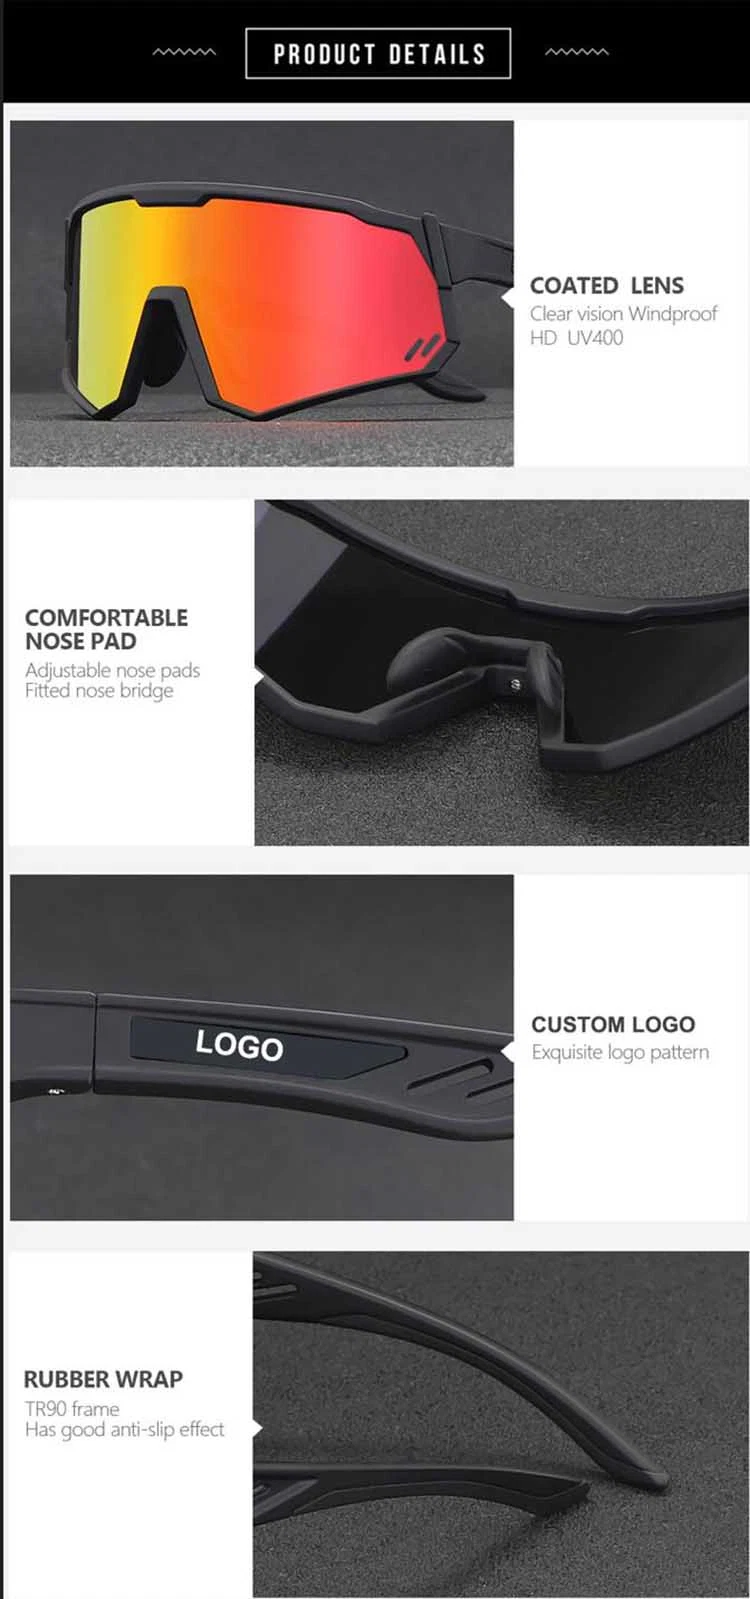 Custom Cool Cycling Sunglasses with Changeable Lenses Hy735